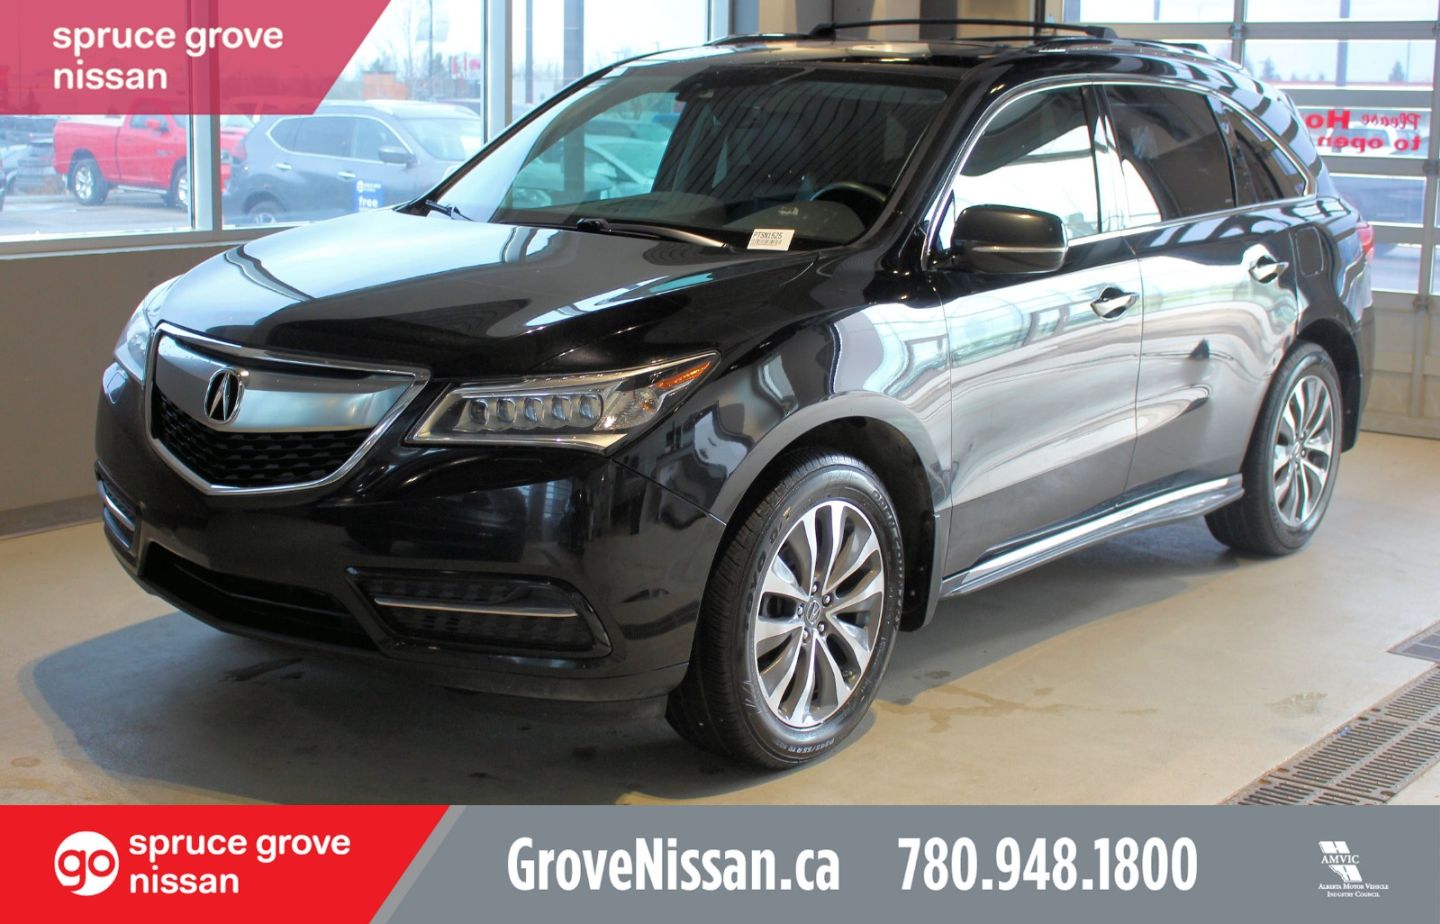 2018 acura mdx for sale ontario